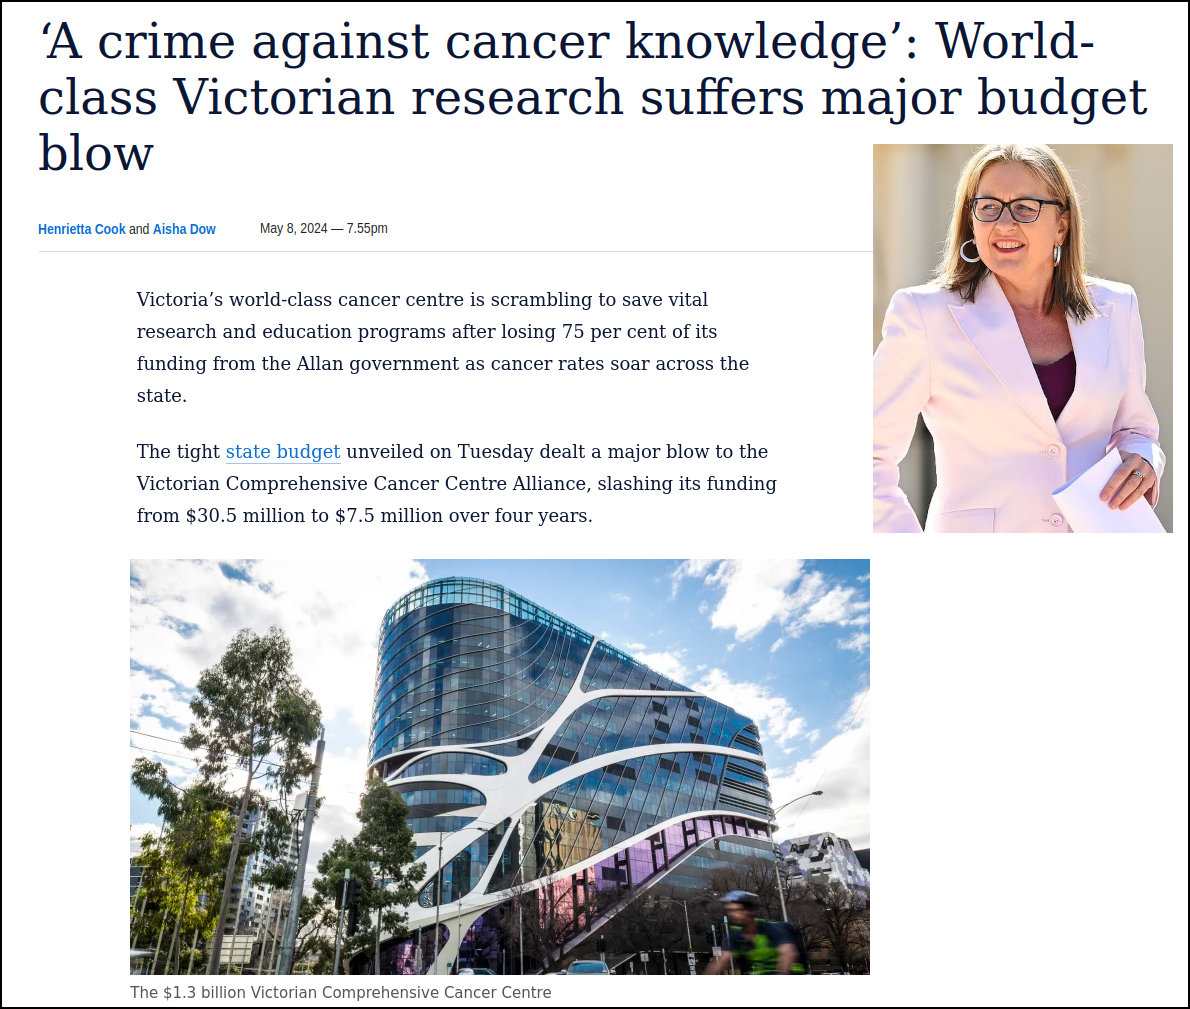 There are 40,000 new cases of cancer diagnosed in Victoria every year. So why did Jacinta Allan slash 75% of government funding to the Victorian Comprehensive Cancer Centre Alliance, redirecting it to Suburban Rail Loop? Is a 26 km railway better than a cancer cure? #springst